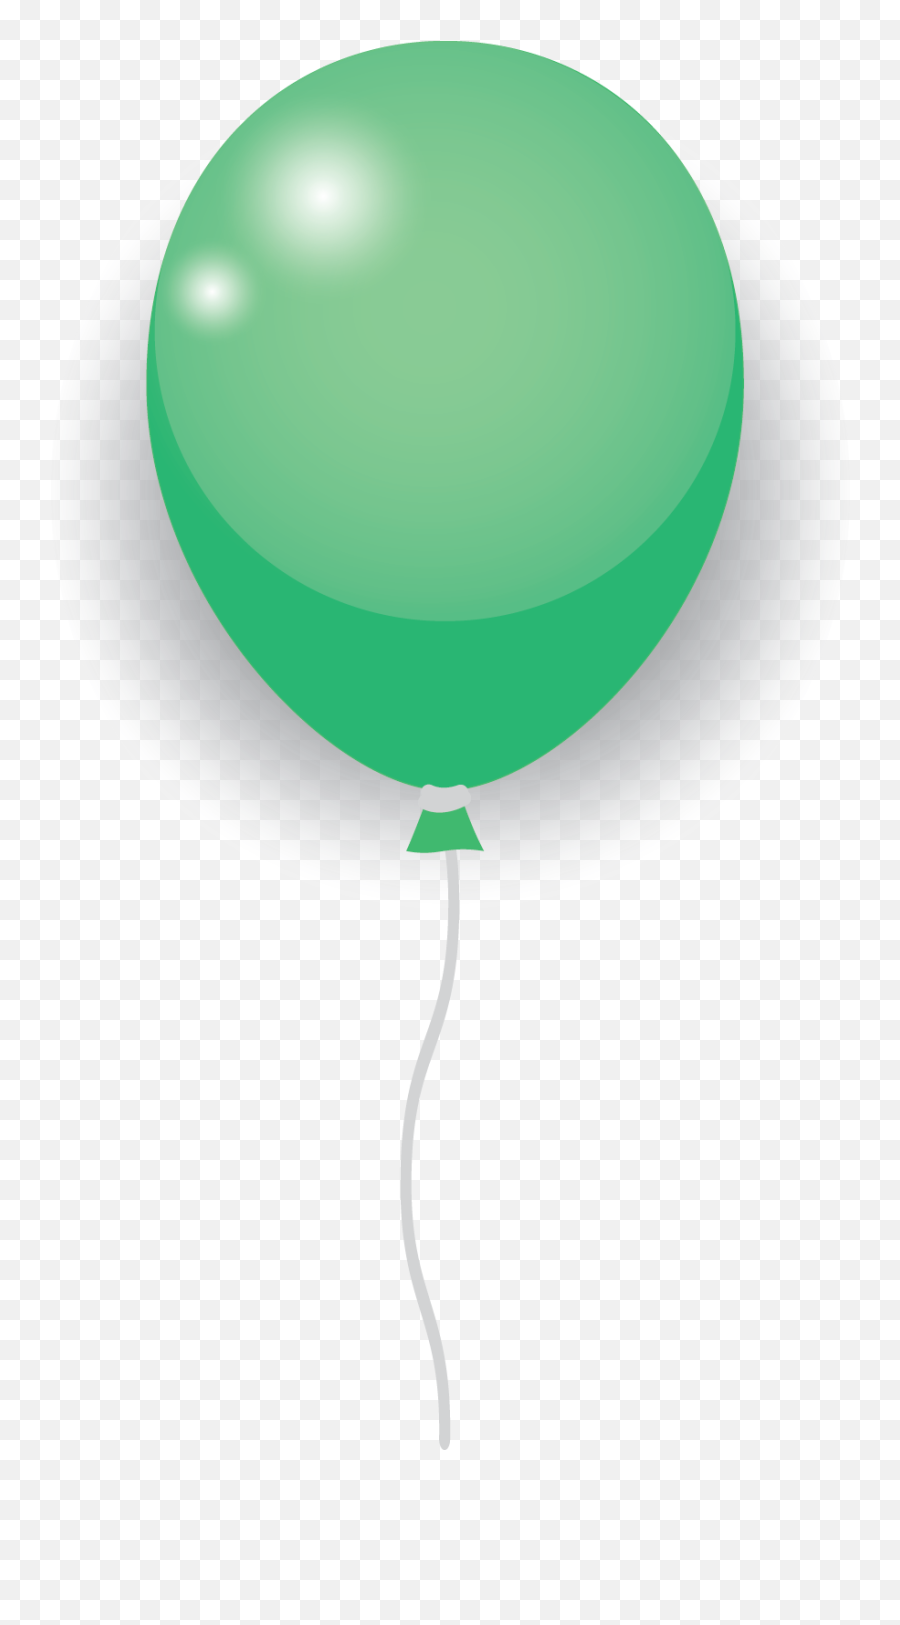 Green Balloon - Balloon Full Size Png Download Seekpng Balloon Emoji,Balloon Emoji